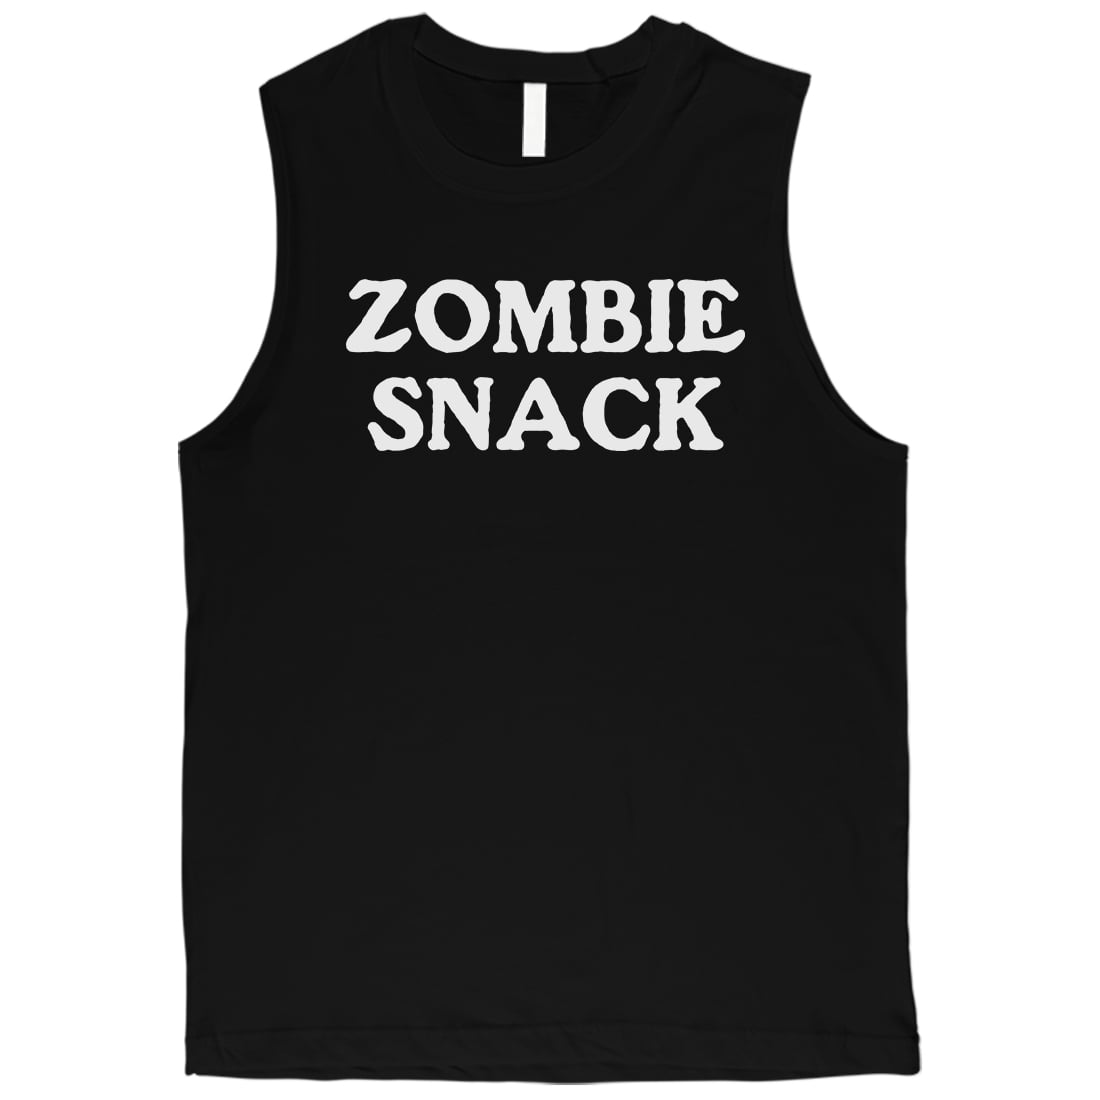 Zombie Snack Mens Black Basic Quote Funny Cool Great Muscle Shirt -  